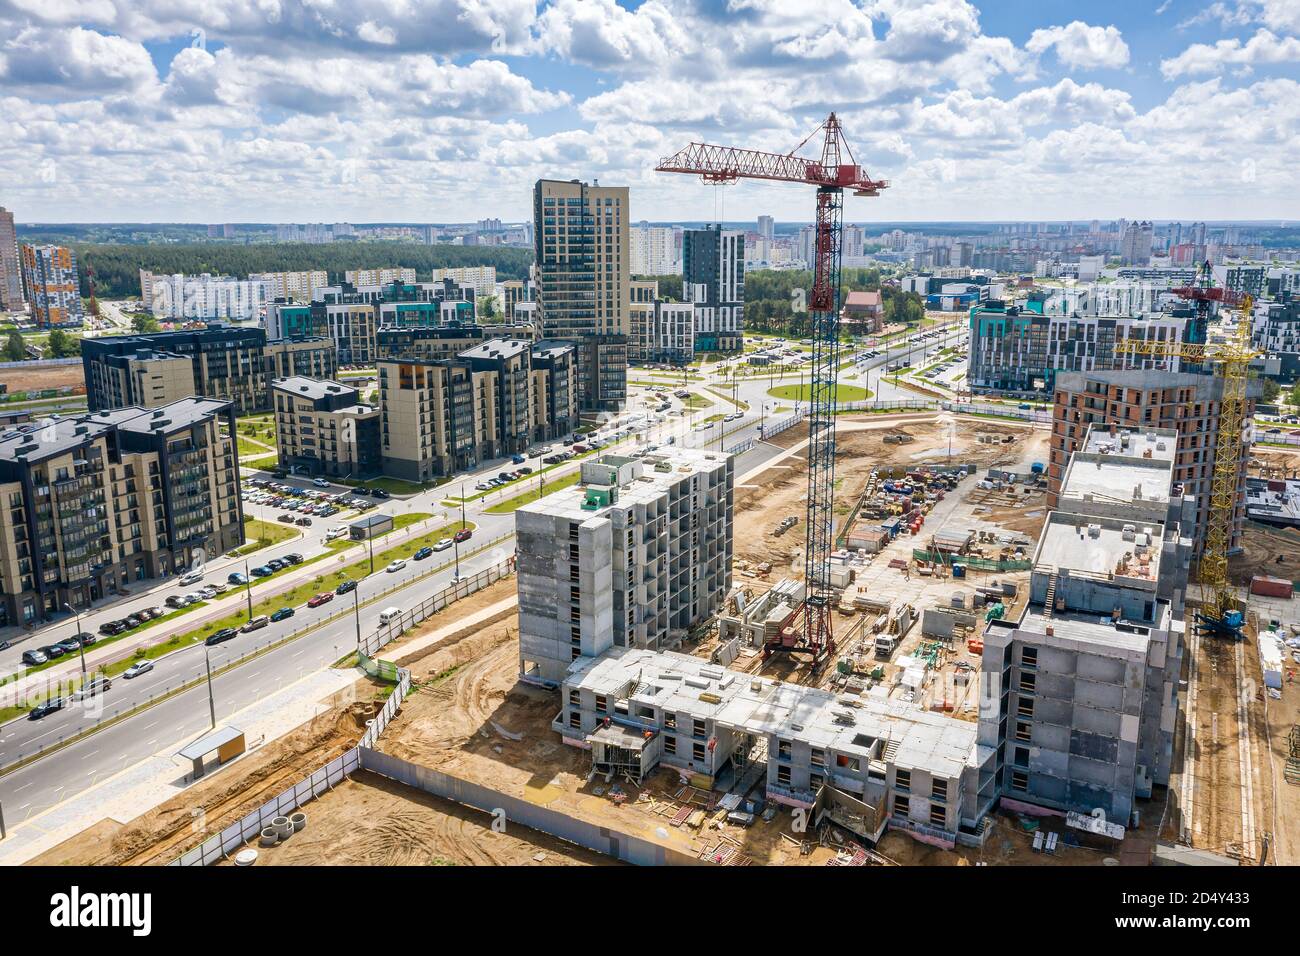 aerial view of construction site of a new residential area with tower cranes Stock Photo